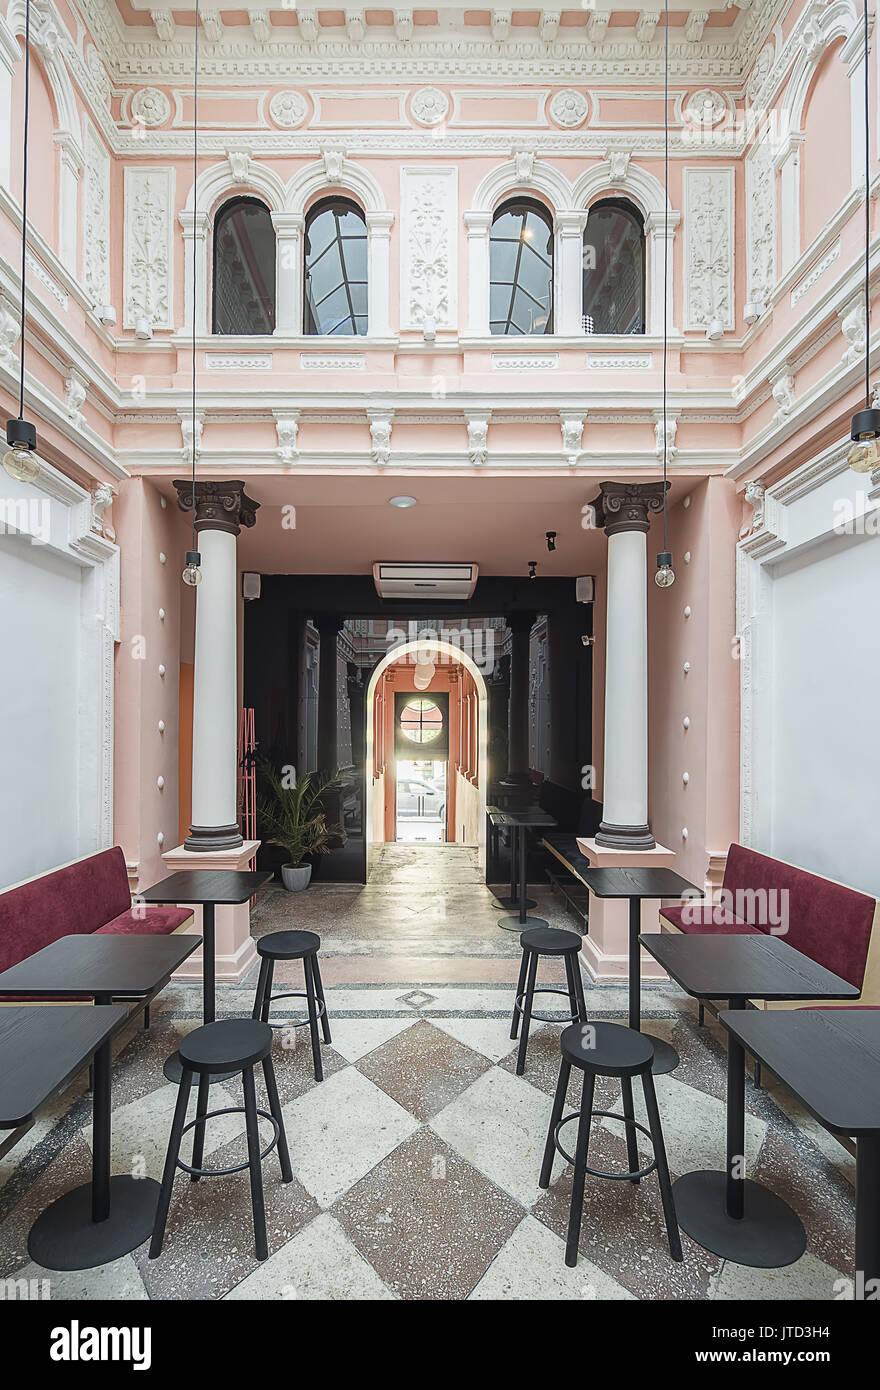 Antique Restaurant With White Stucco Molding On The Pink